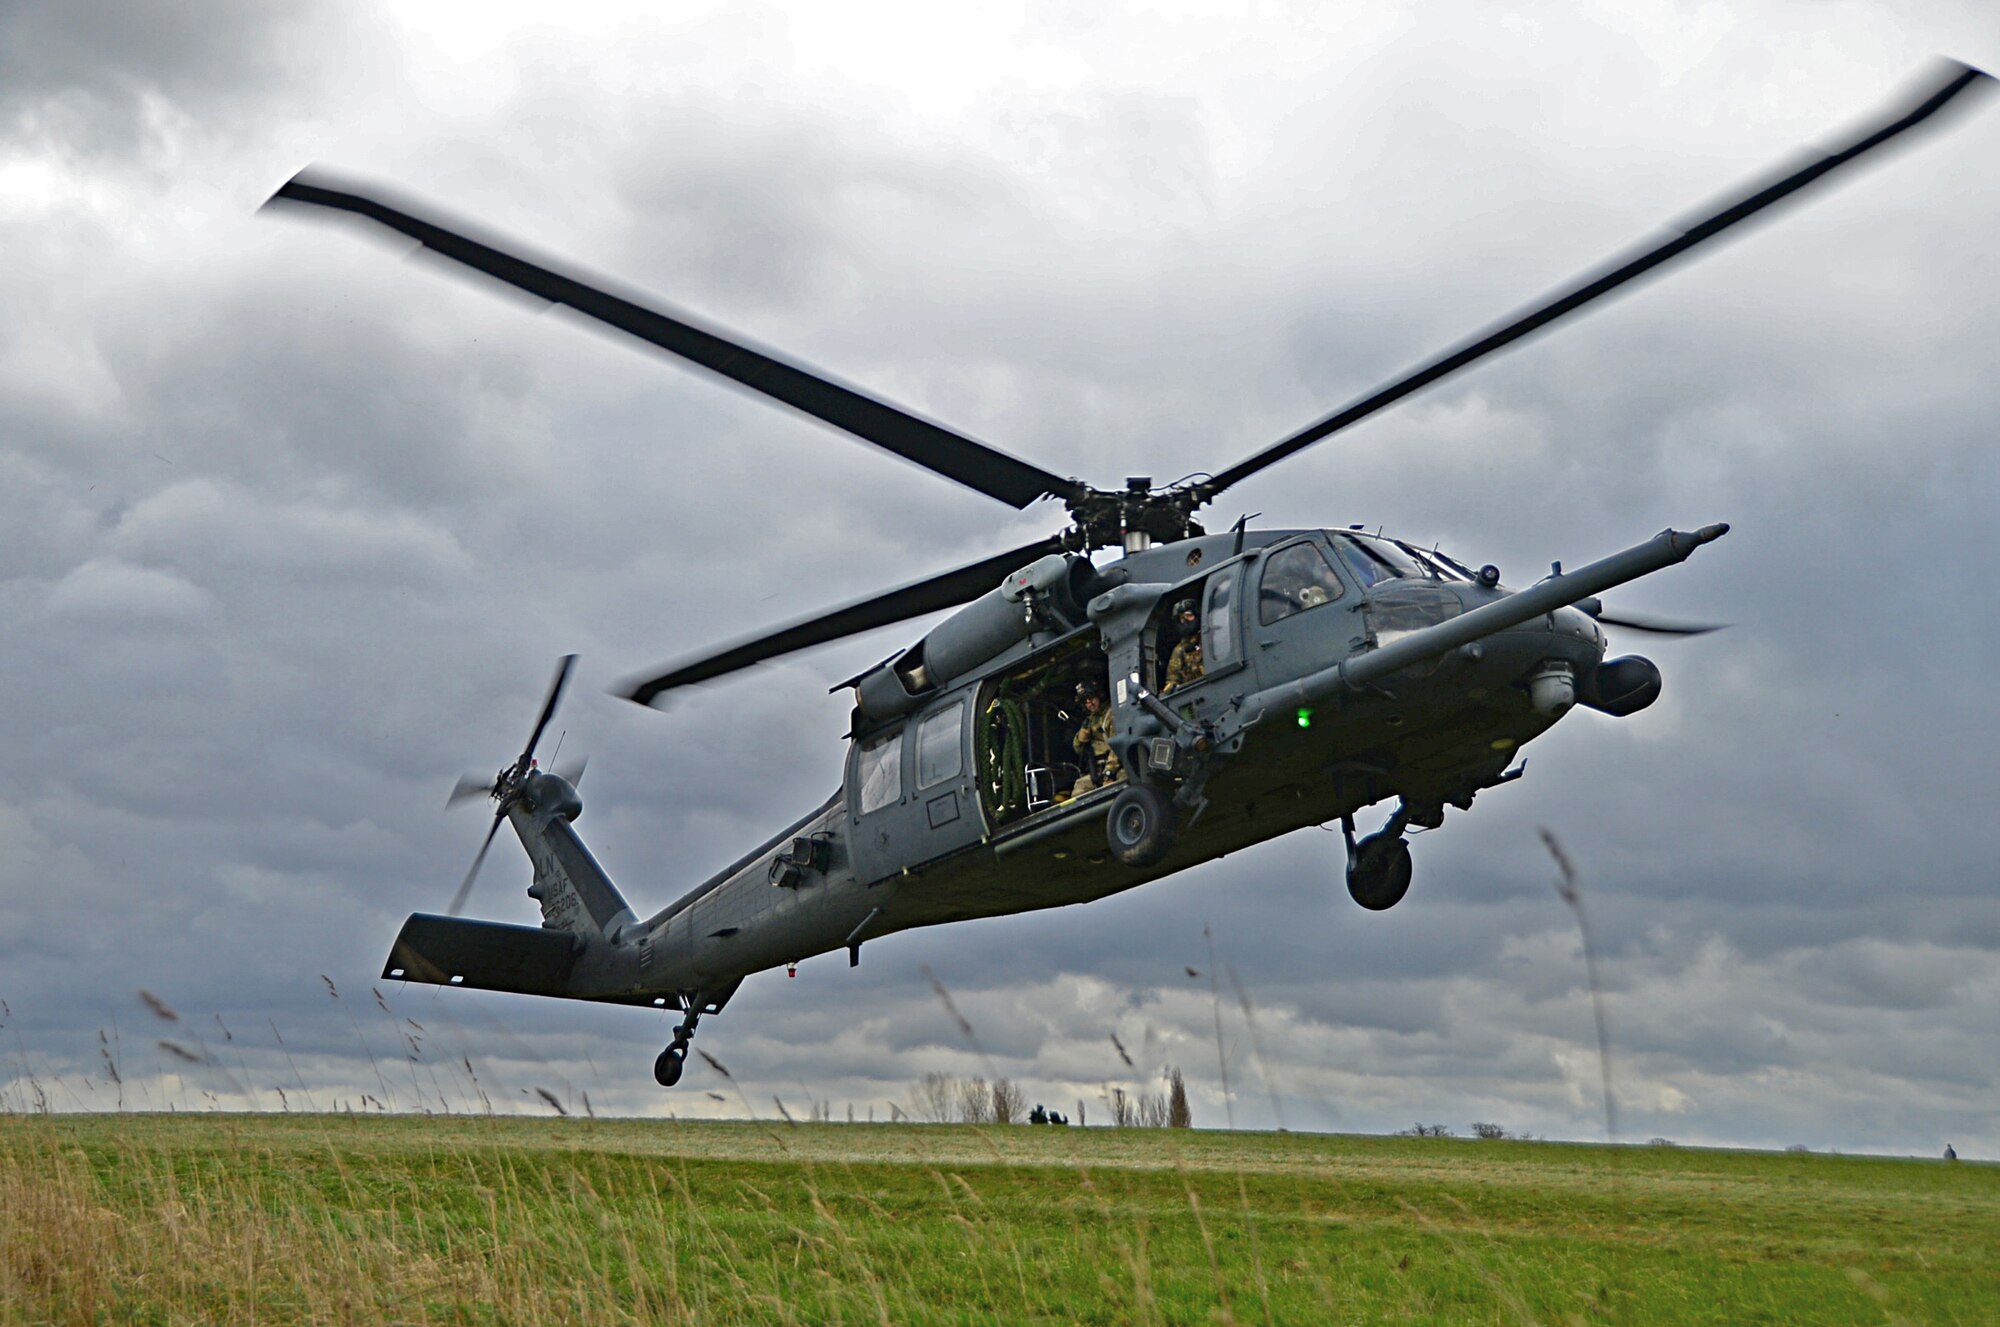 An HH-60G Pave Hawk assigned to the 56th Rescue Squadron prepares to land during a combat search and rescue task force training exercise near Hinderclay, England, Feb. 4, 2016. The training focused on rescue techniques and involved various squadrons and personnel assigned to the 48th Fighter Wing and 100th Air Refueling Wing. (U.S Air Force photo/Senior Airman Erin Trower) 